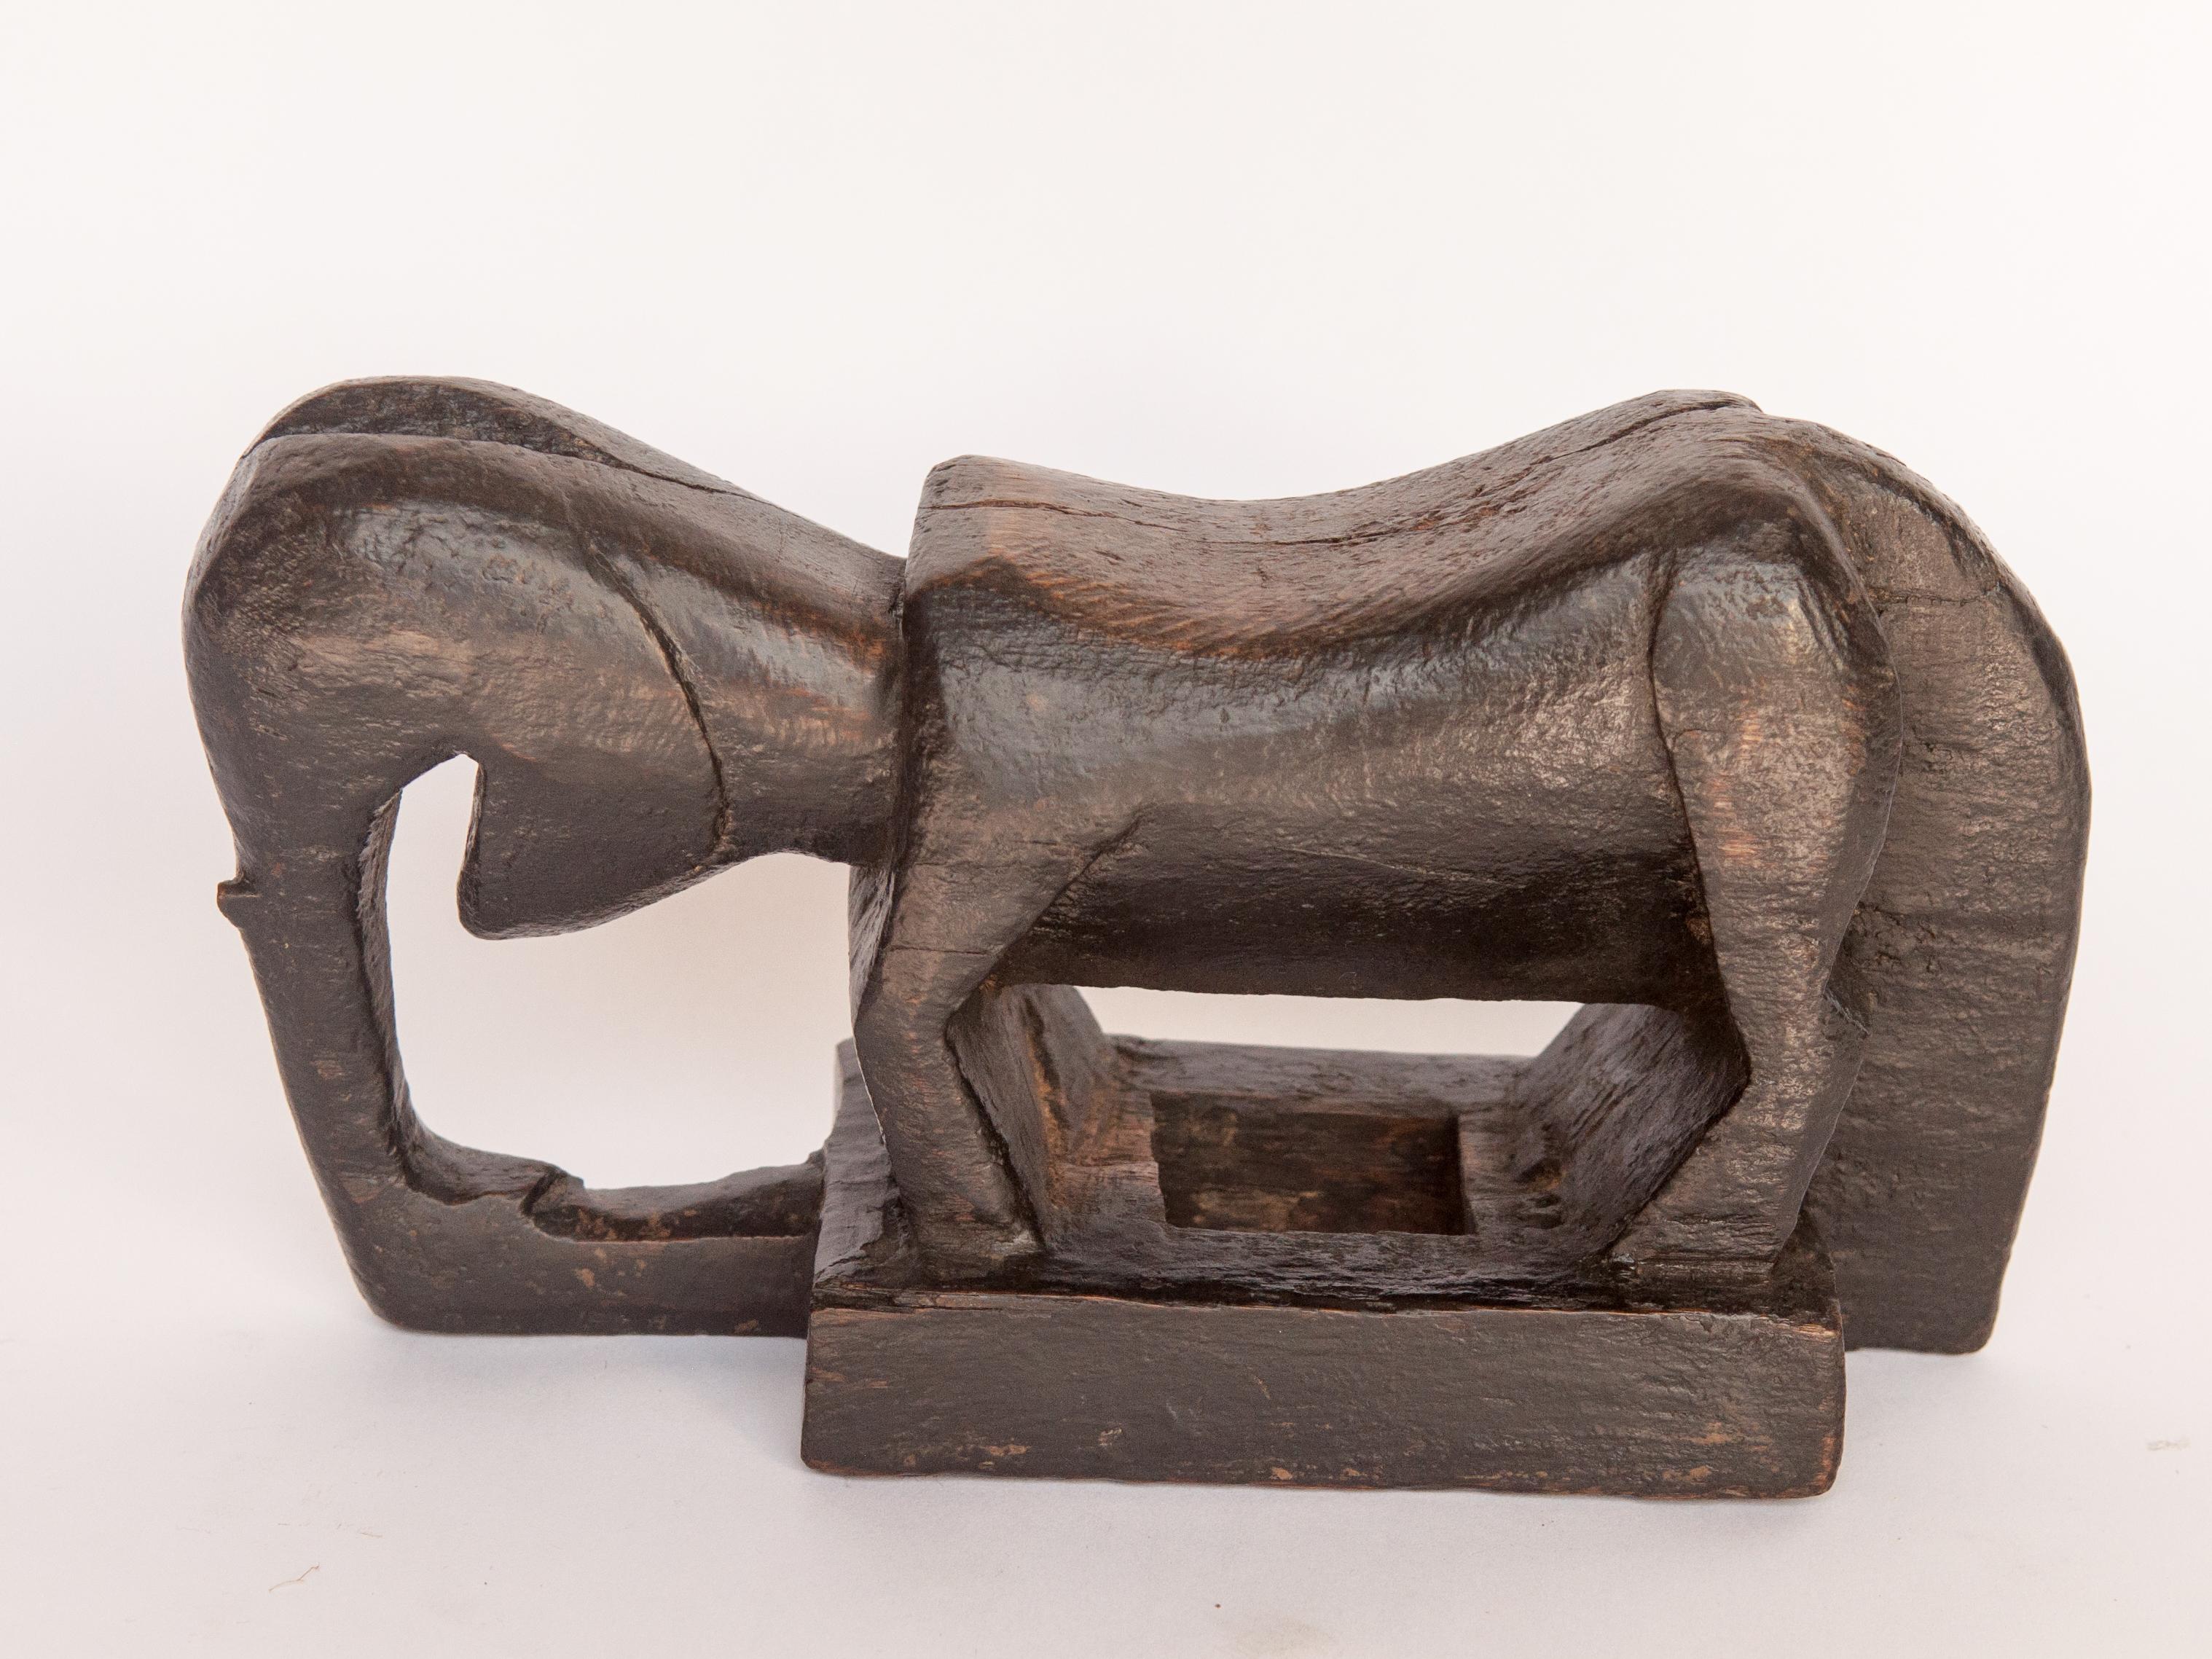 Old wooden staff carving. Stylized elephant Motif. From the Tharu People of Nepal, mid-20th century.
This carving formed the end piece of a large carrying staff, used to support a heavy load during rest intervals during transport. Such staffs were